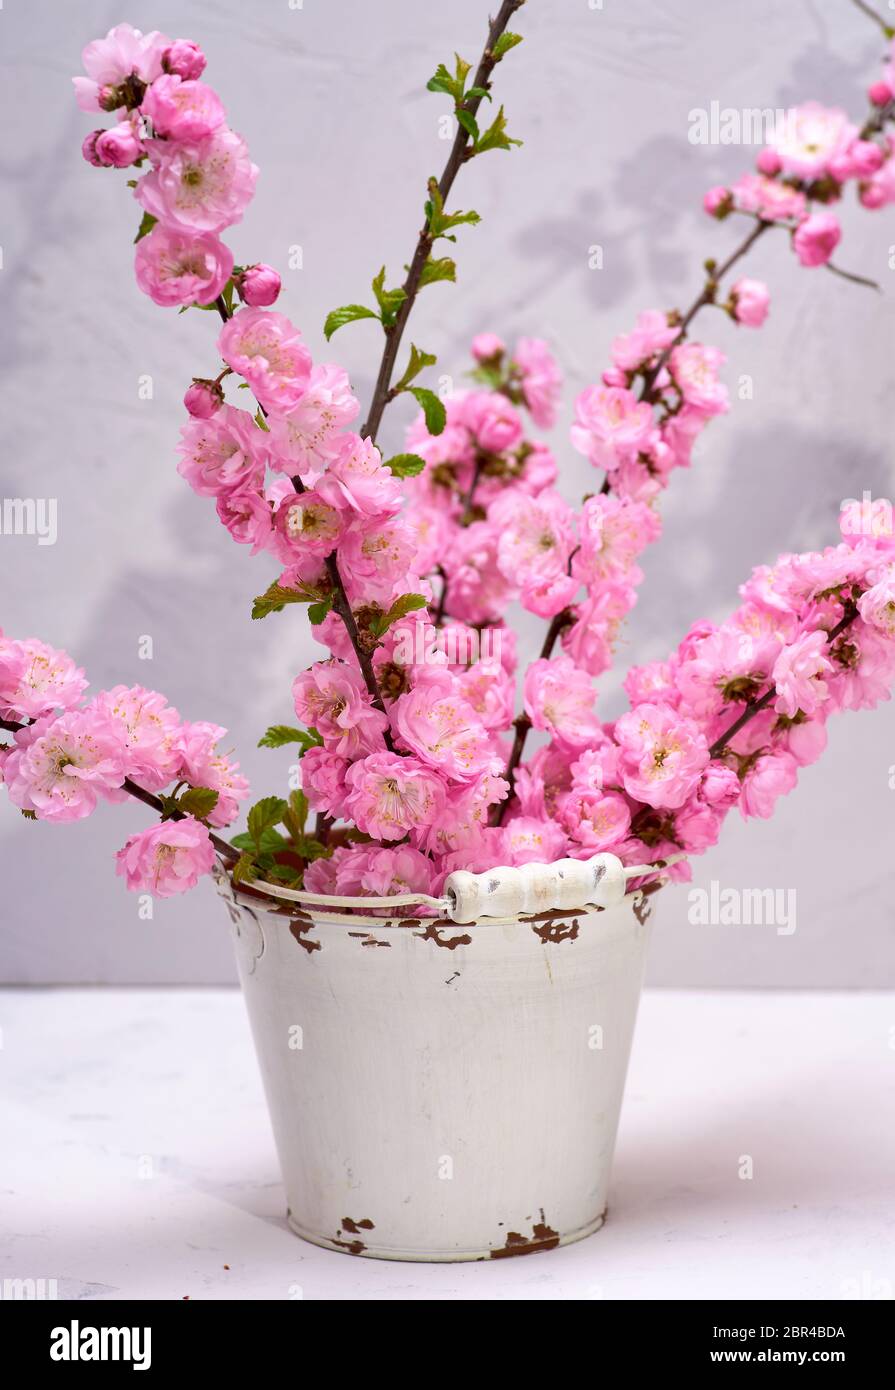 branches with pink flowers Louiseania triloba on a white background, close up Stock Photo